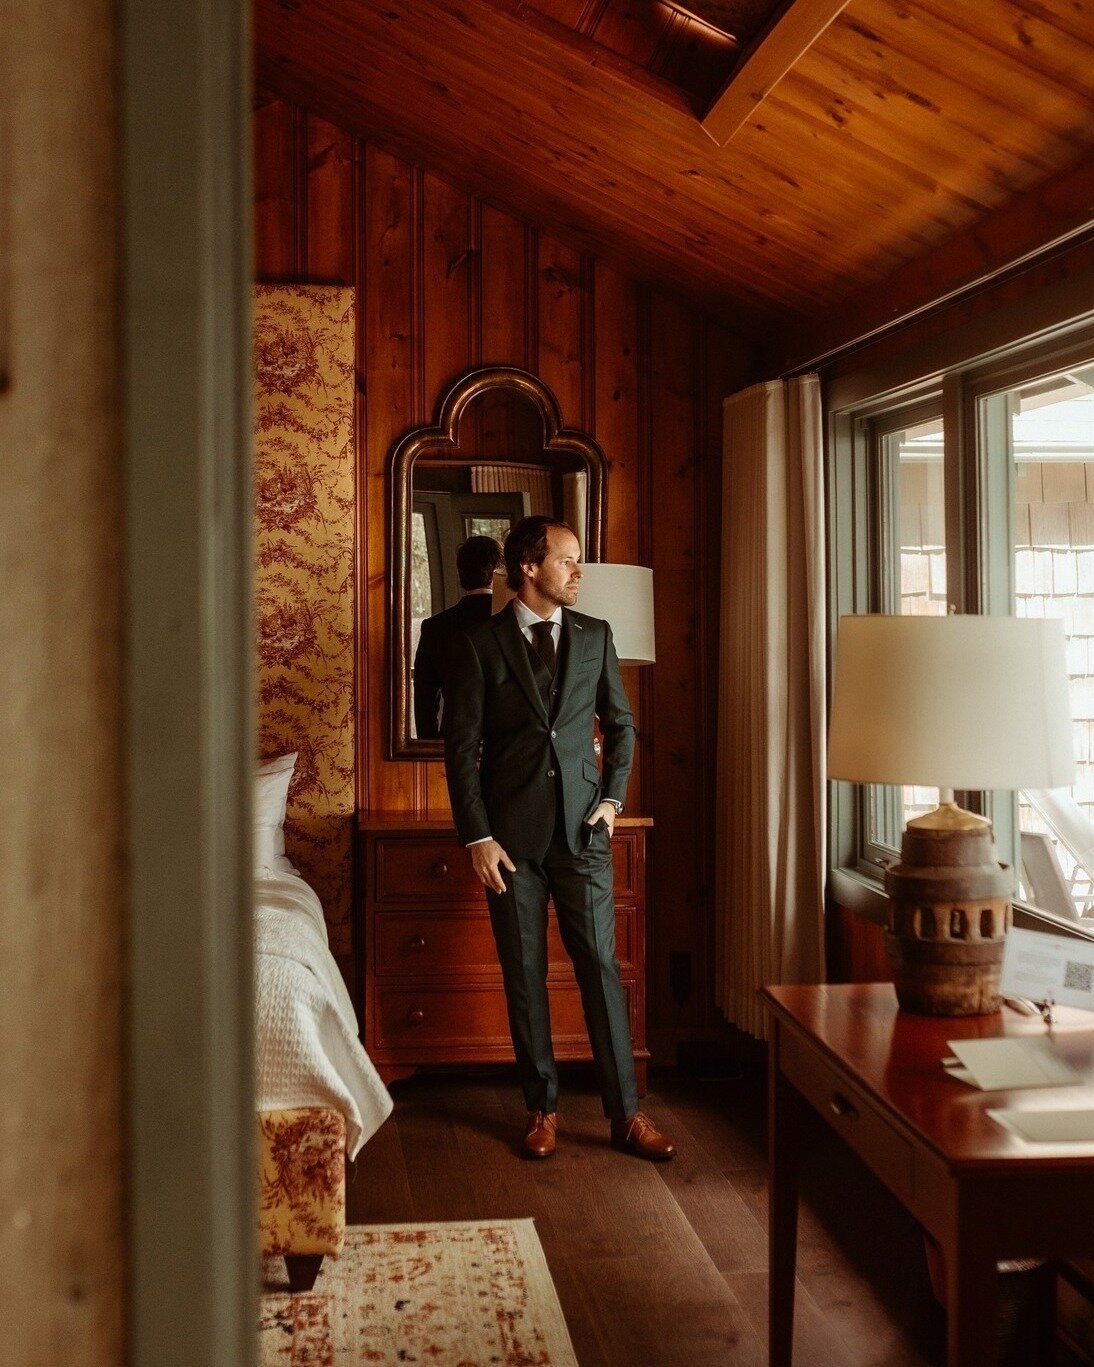 The @manoirhovey for the getting ready is just a dream 🤩
.
.
.
#groomgettingready #groominspiration #manoirhoveywedding #manoirhovey #weddingphotographer #mariagemontreal #mariagenature #smallwedding #groomsuit #groomsmenstyle